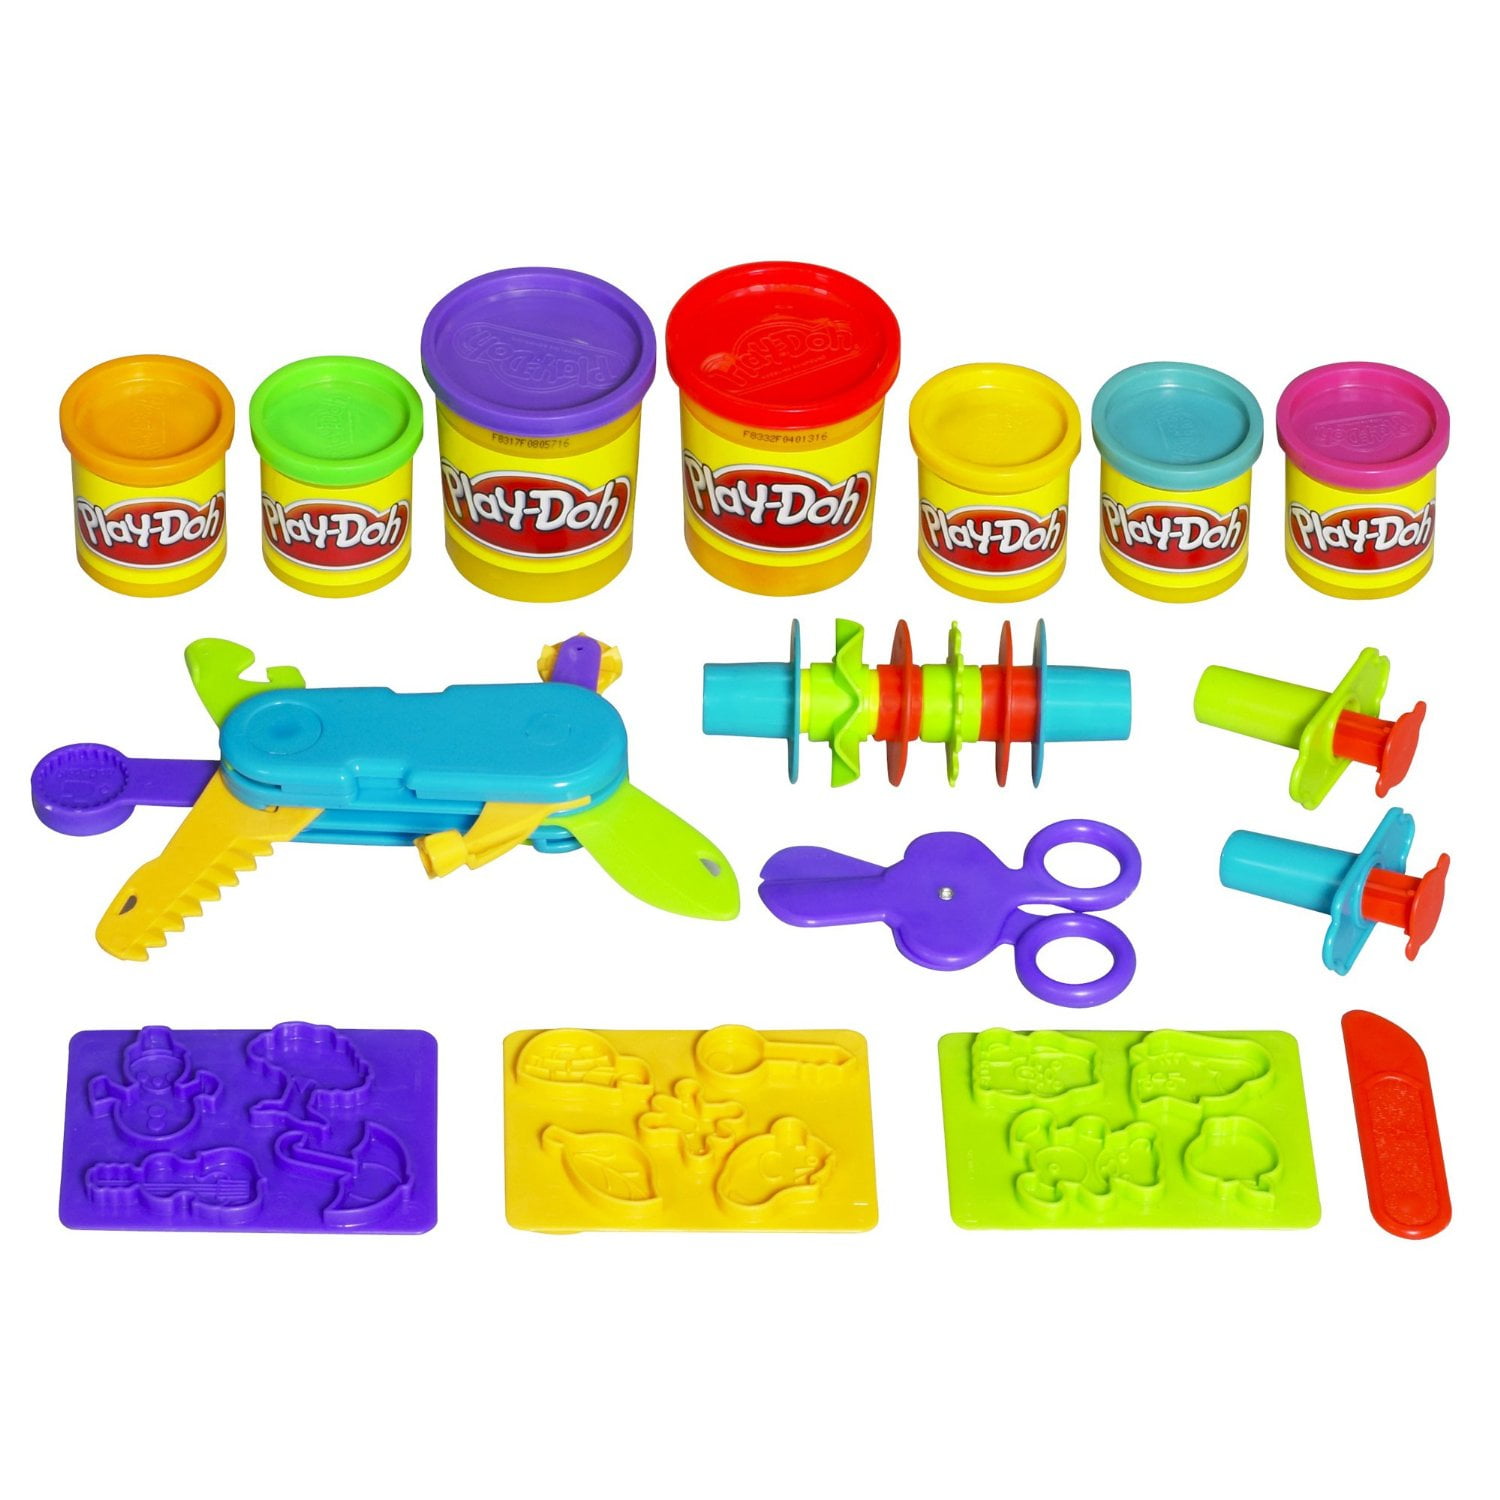 Play-Doh Tools and Playset Pack - Toolin' Around Playset NEW by HASBRO  Playdough